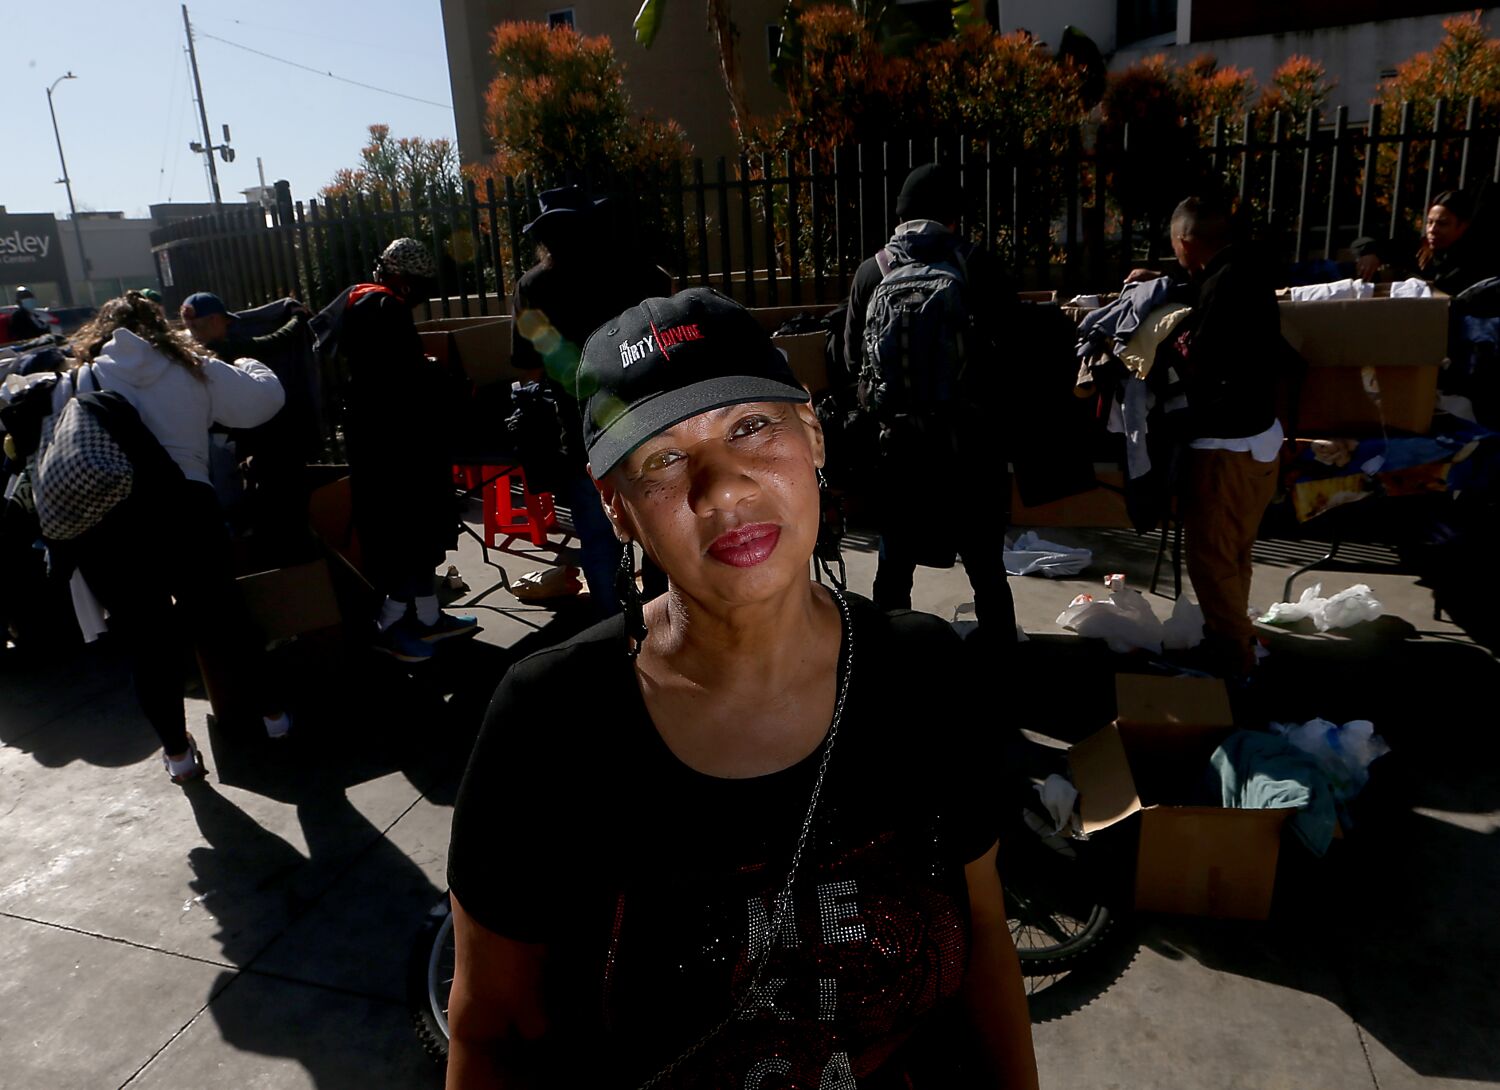 L.A. skid row residents angry over the destruction of a community hub